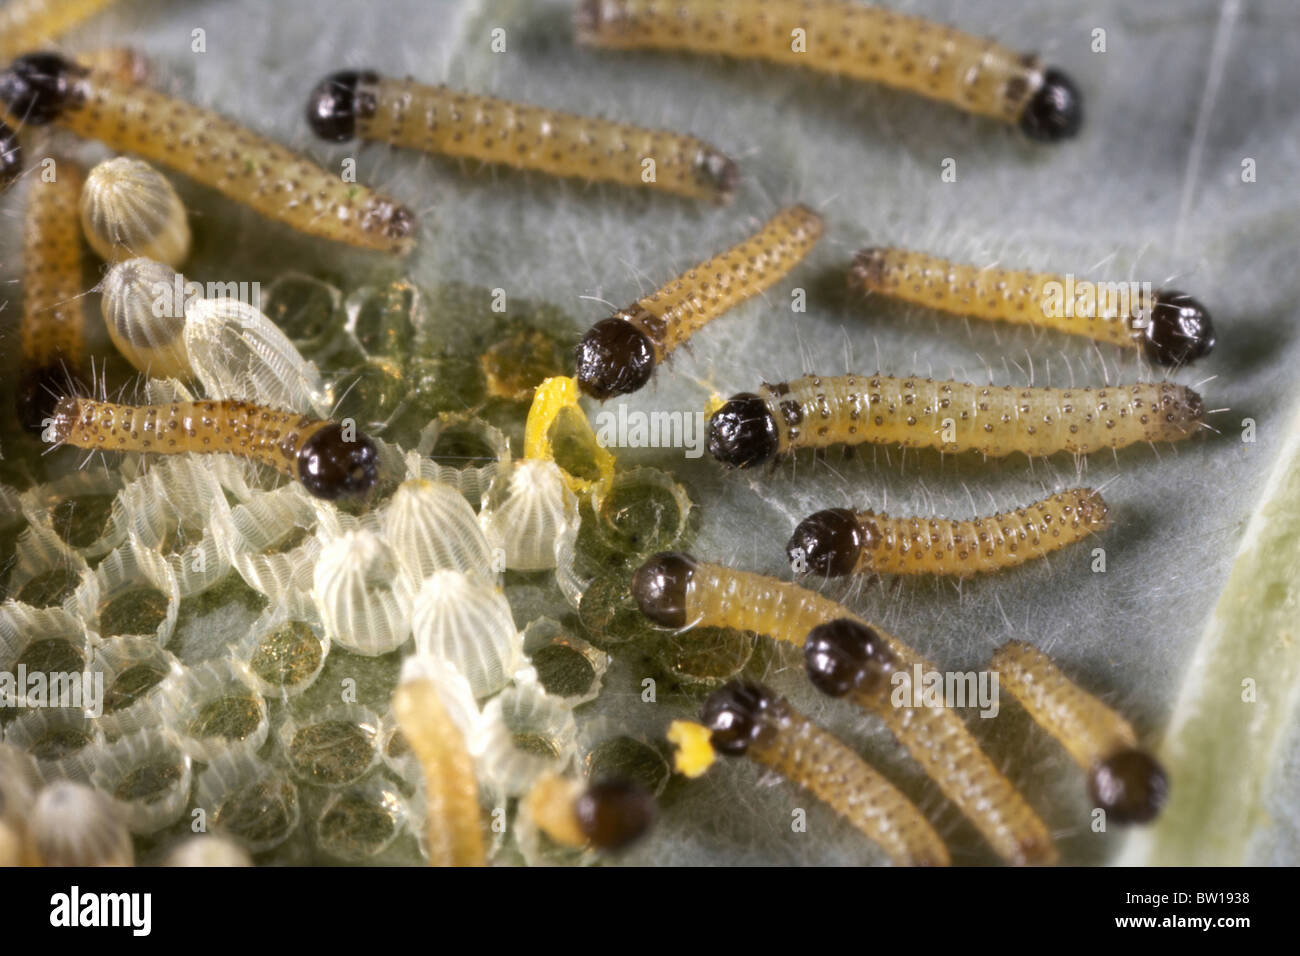 Large white or cabbage white butterfly, Pieris brassicae eggs and newly hatched caterpillars, UK Stock Photo